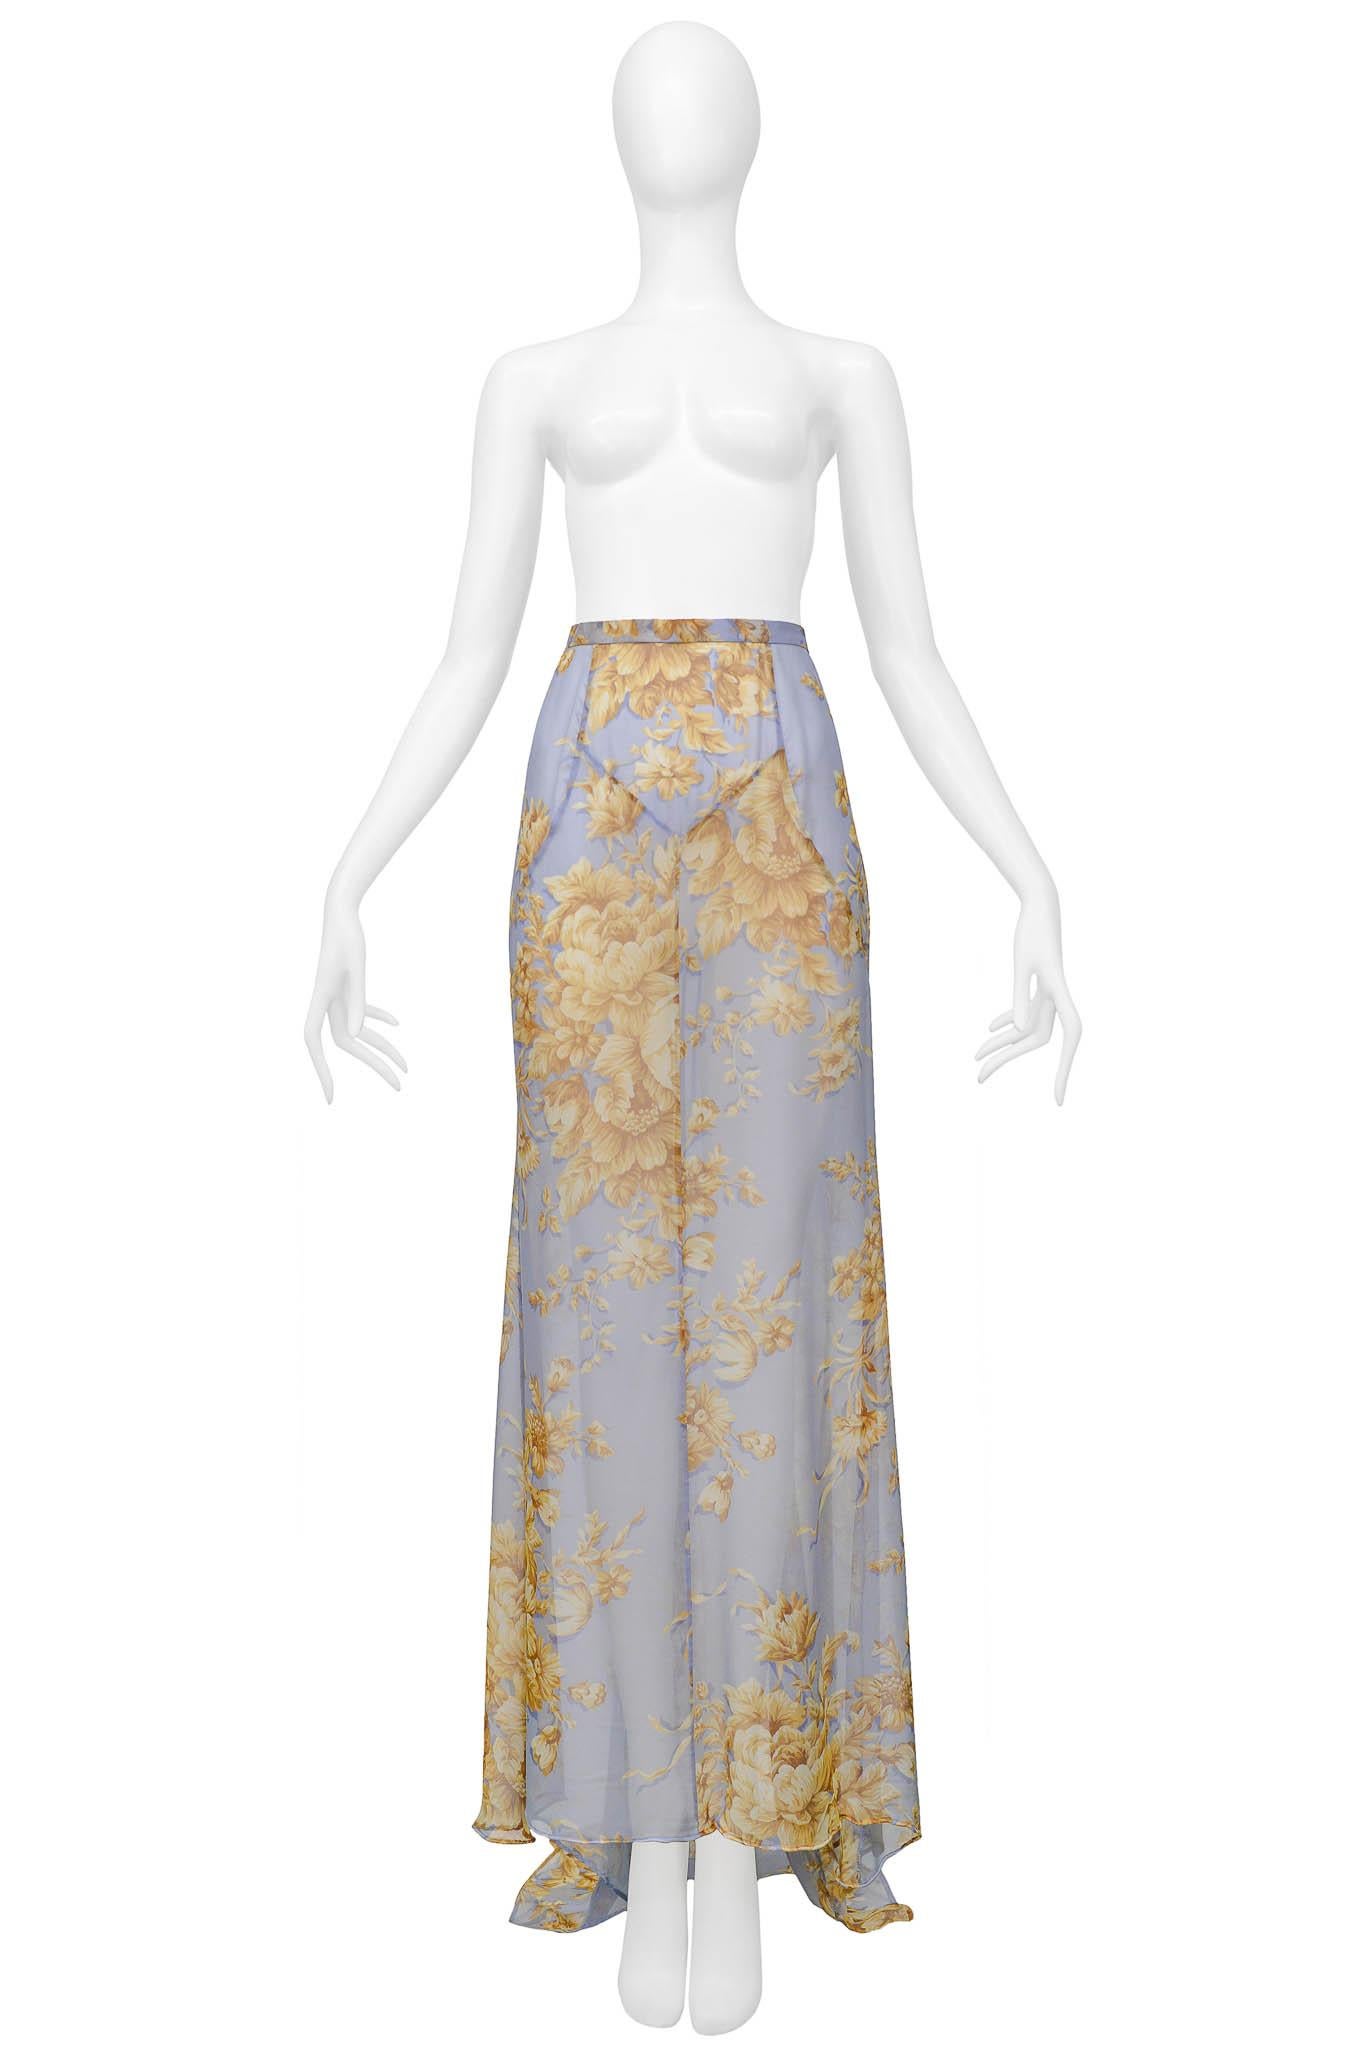 Resurrection Vintage is excited to offer a vintage Dolce & Gabbana blue maxi skirt featuring a tan flower pattern, a high-low hem, and an invisible zipper at the back. Minor Staining and a tiny hole along the hem of the skirt.

Dolce & Gabbana
Size